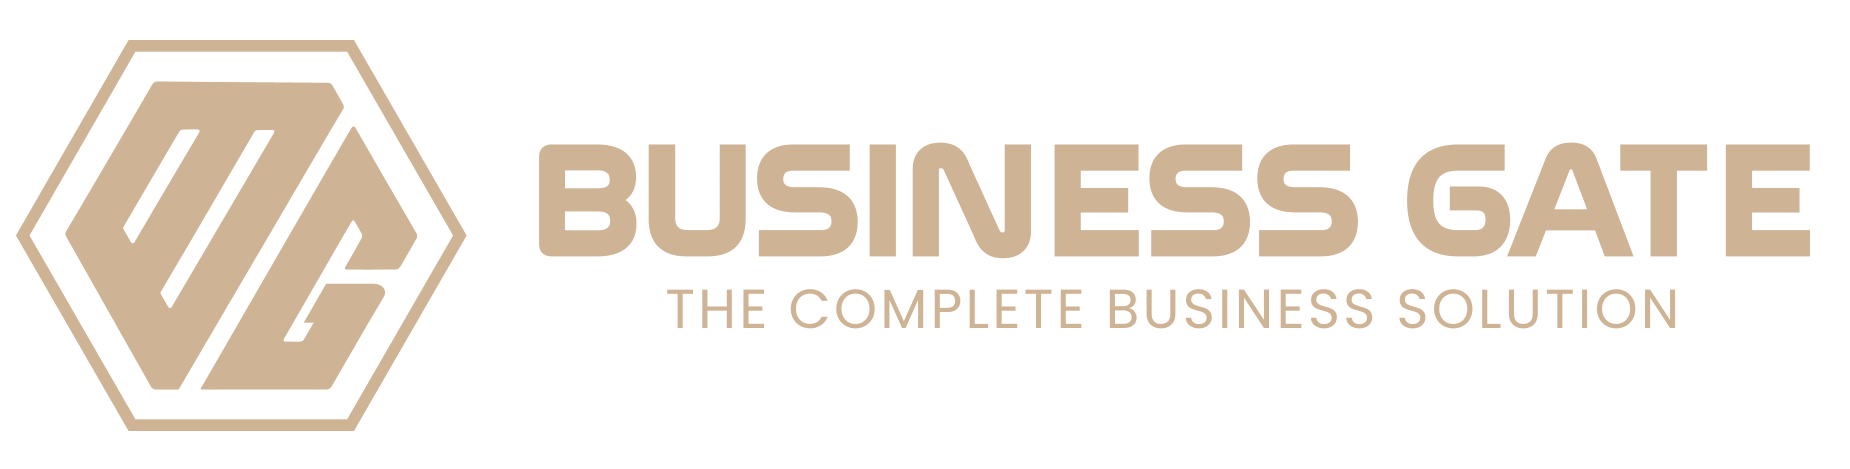 HOW TO START A BUSINESS SHARJAH